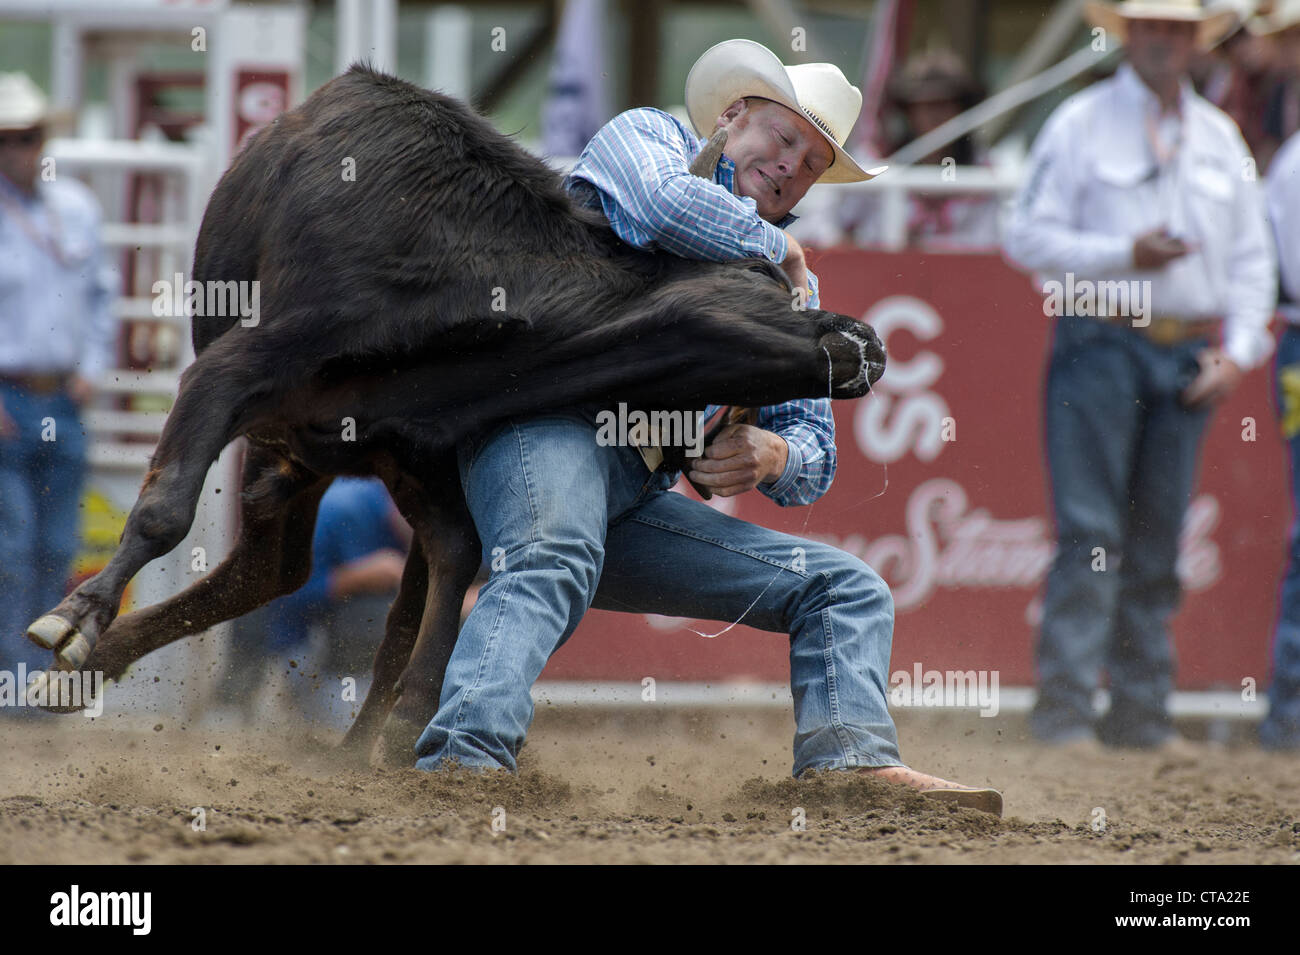 Steer wrestler at the Calgary Stampede Rodeo Stock Photo